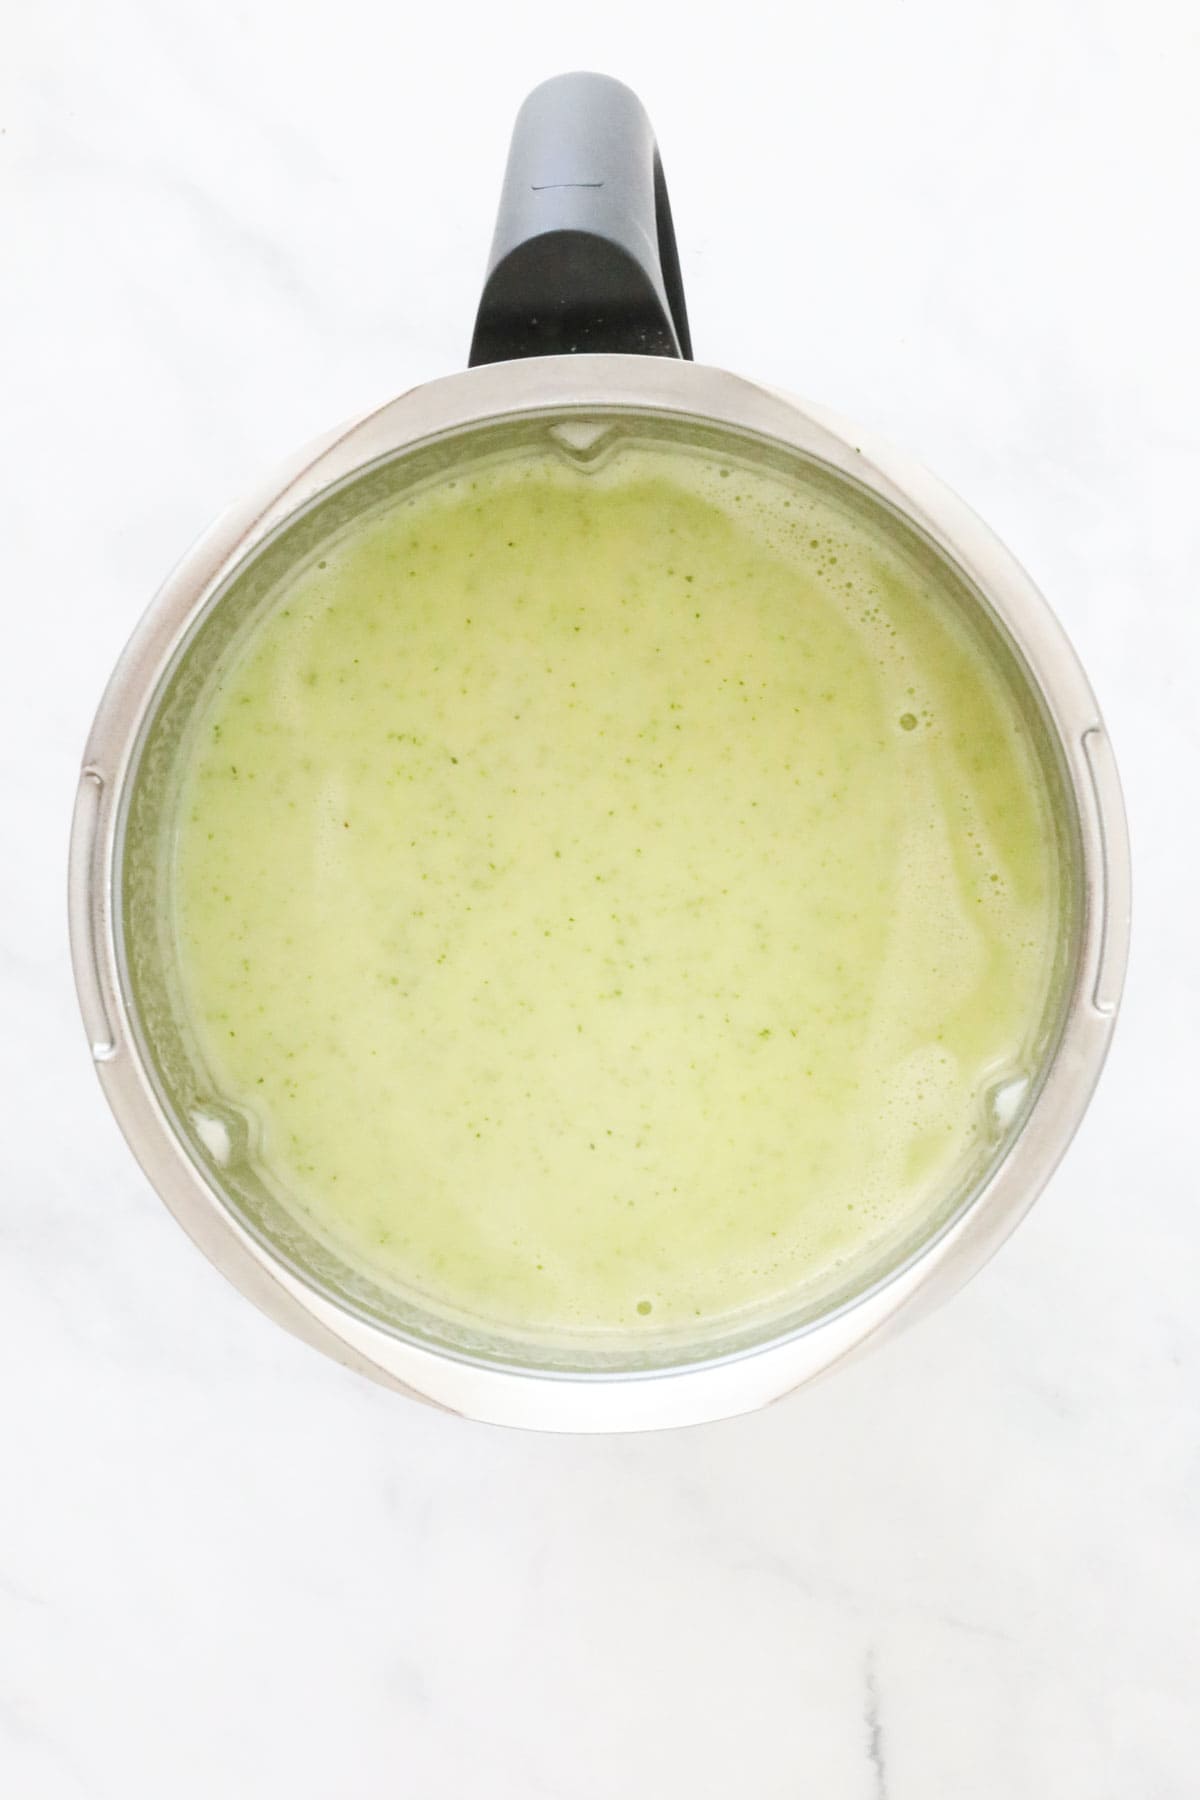 A Thermomix bowl filled with creamy zucchini soup.